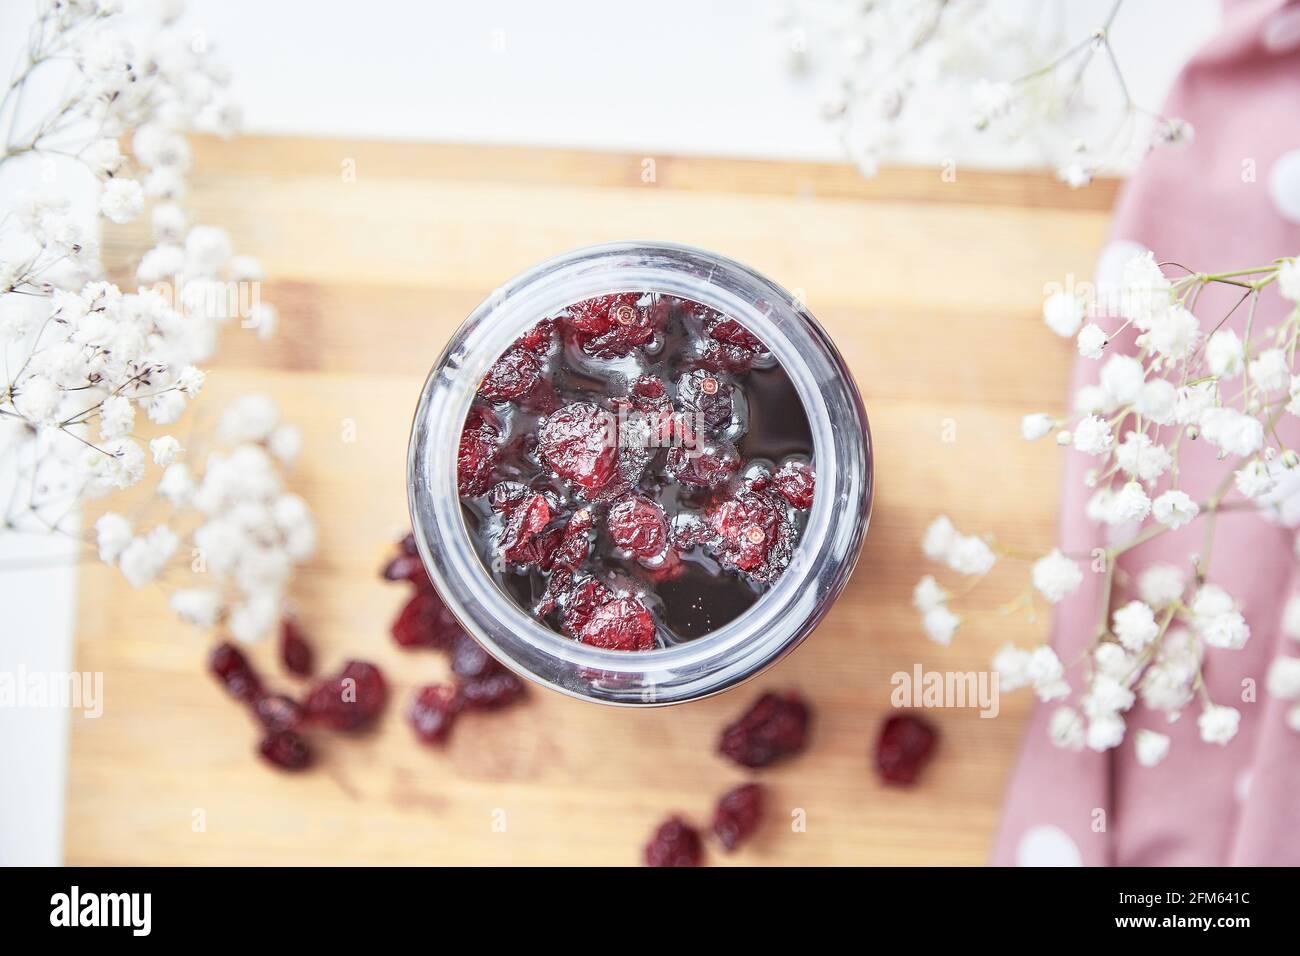 Healthy fermented honey product with cranberry, probiotics. Food preservative at home. Delicious recipe concept. Anti-viral food. Top view. Decoration with gypsophila flower Stock Photo